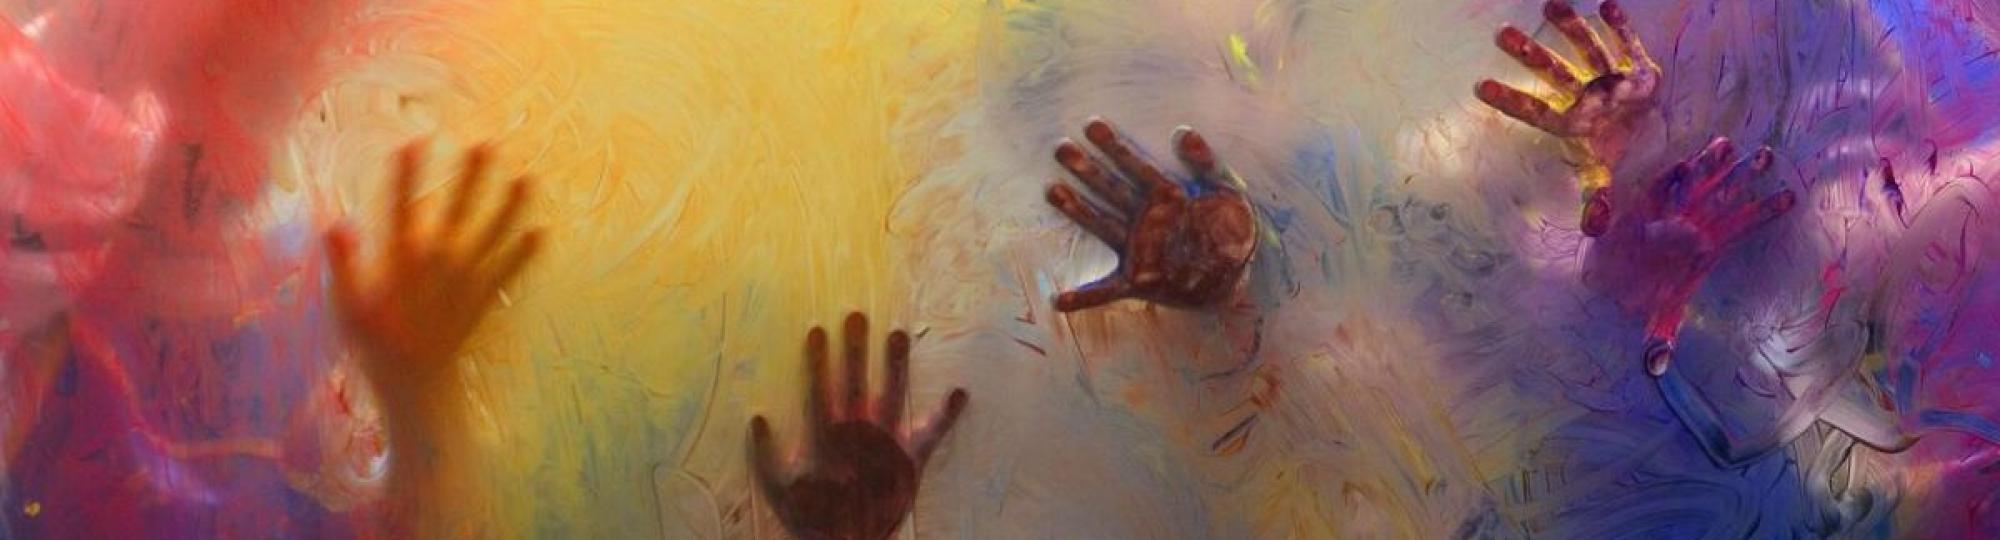 childrens hands held up on a glass wall with colorful paint 